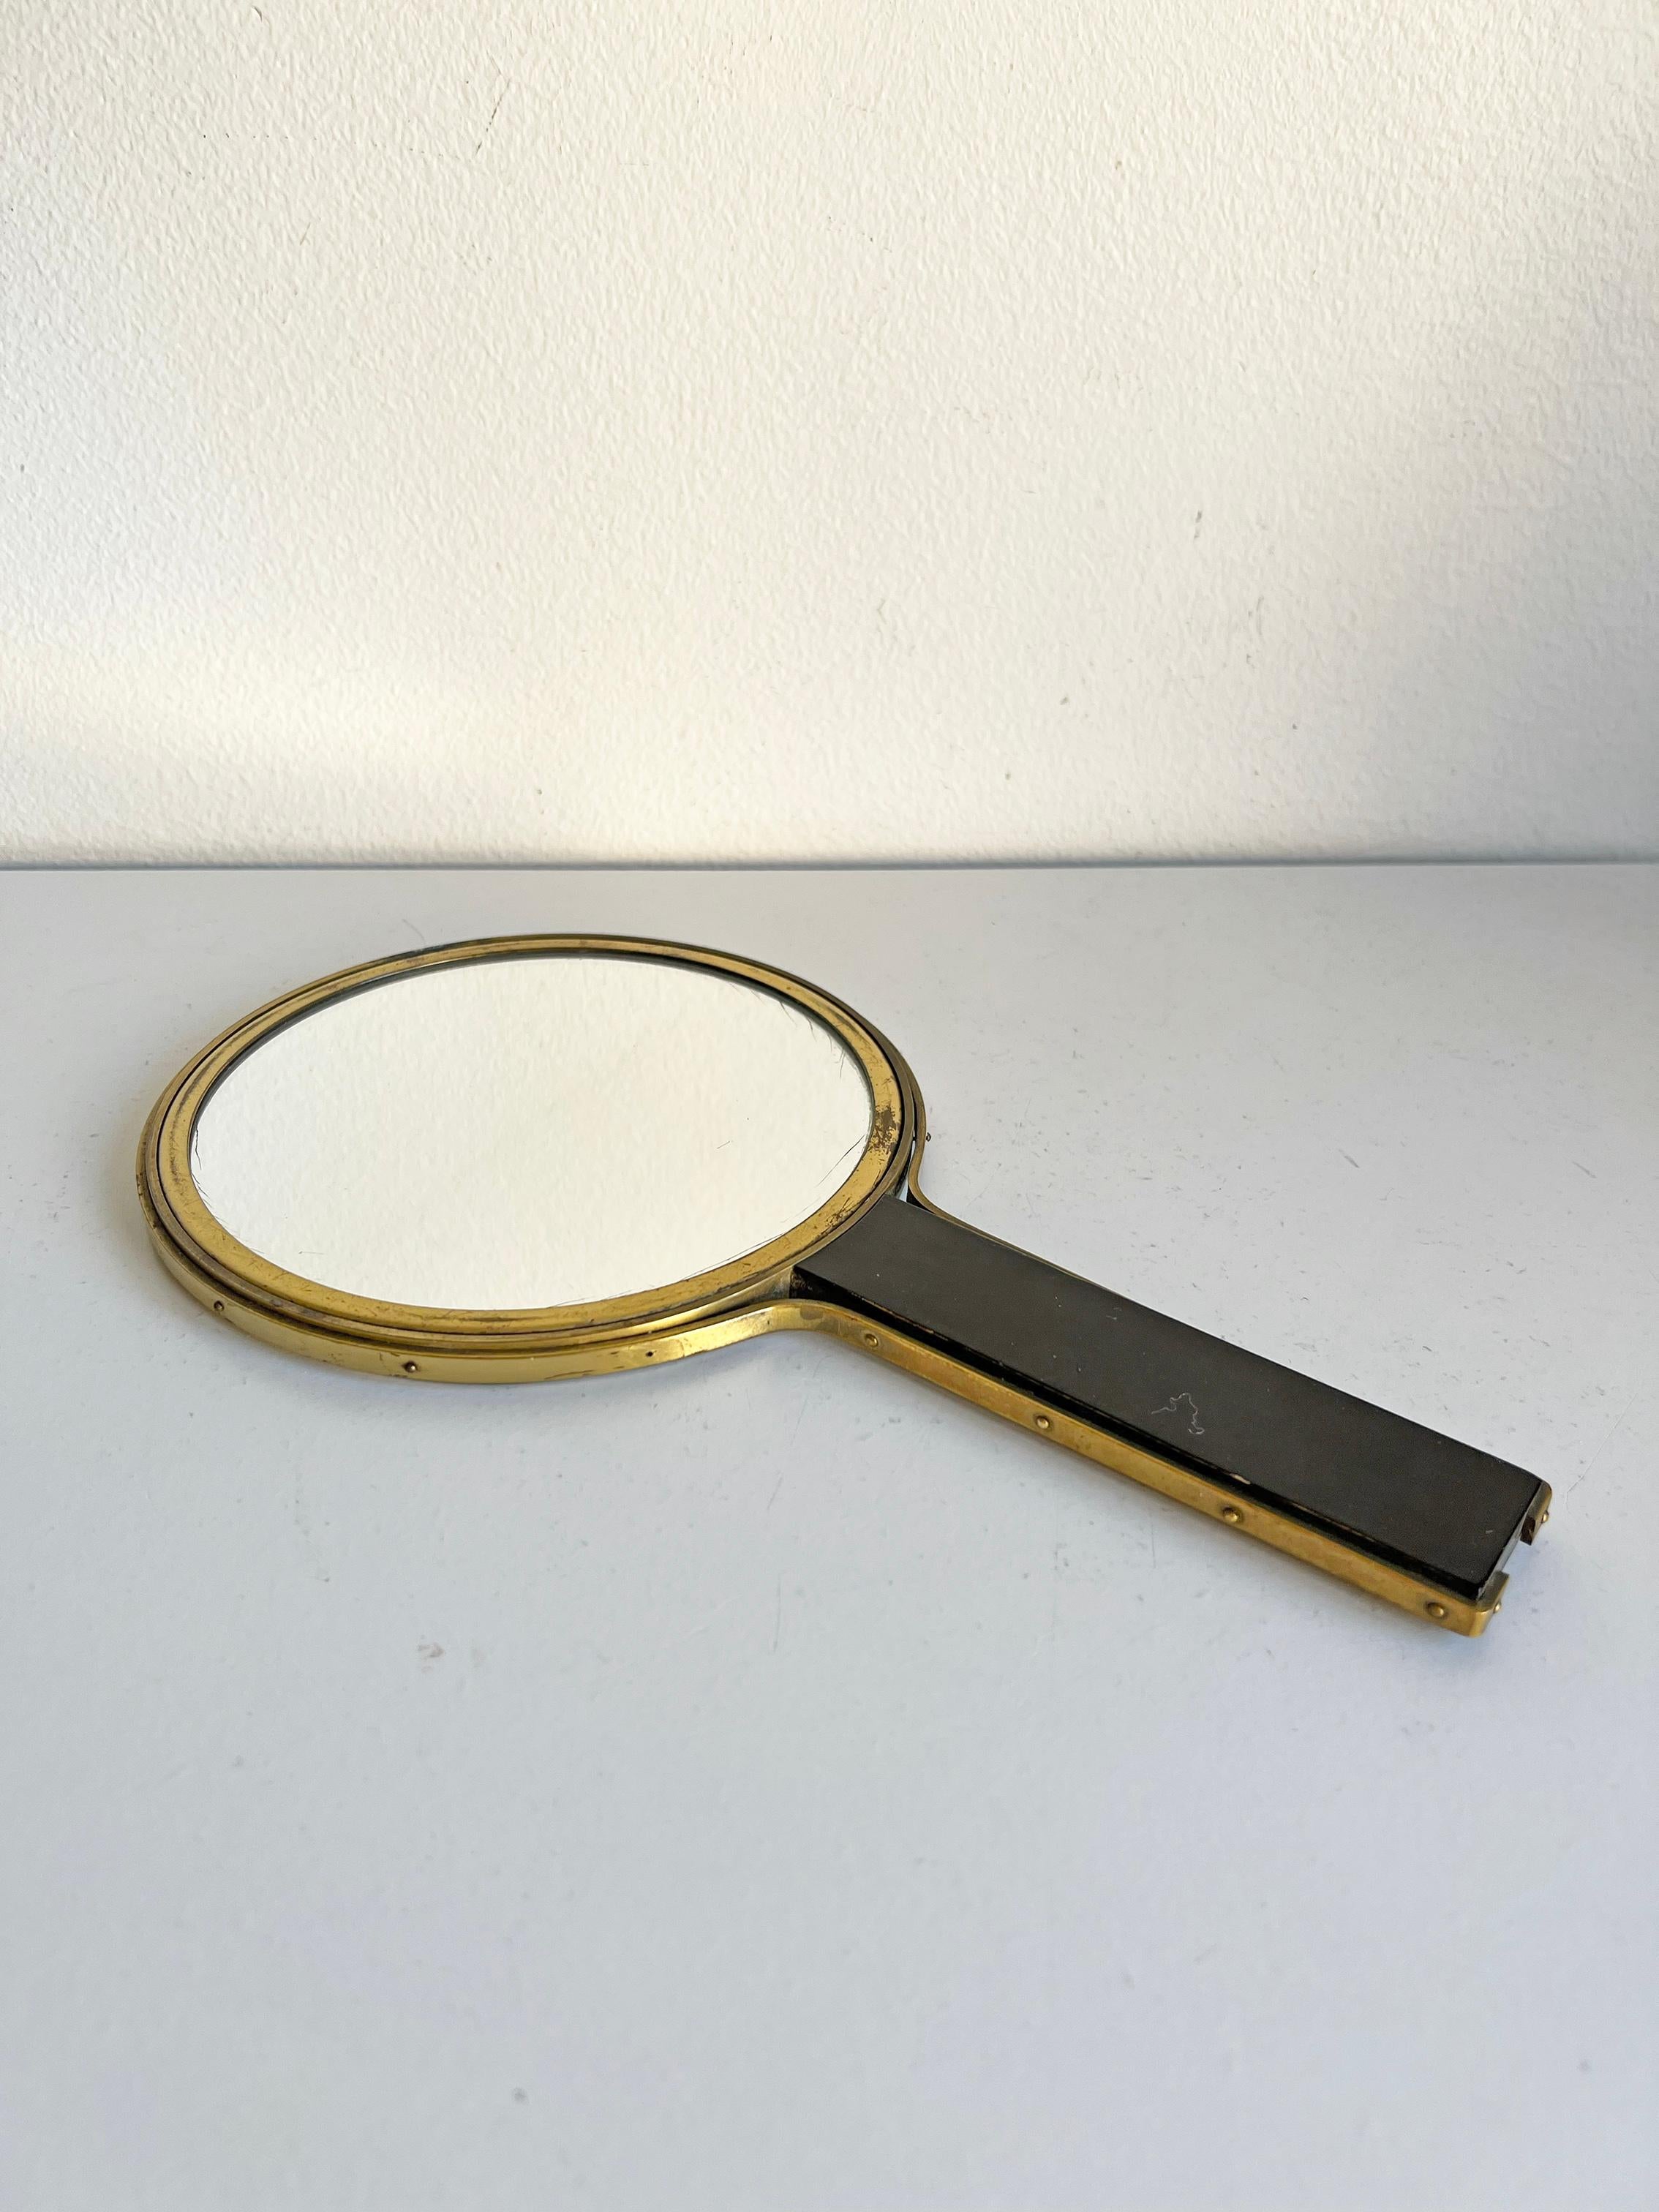 Very rare, two sided mirror in brass and wood attributed to Ivar Ålenius-Björk for Ystad Metall - 1939. 
Good vintage condition, wear consistent with age and use. Age-appropriate patina/wear to the metal components. Mirror itself has some scratches